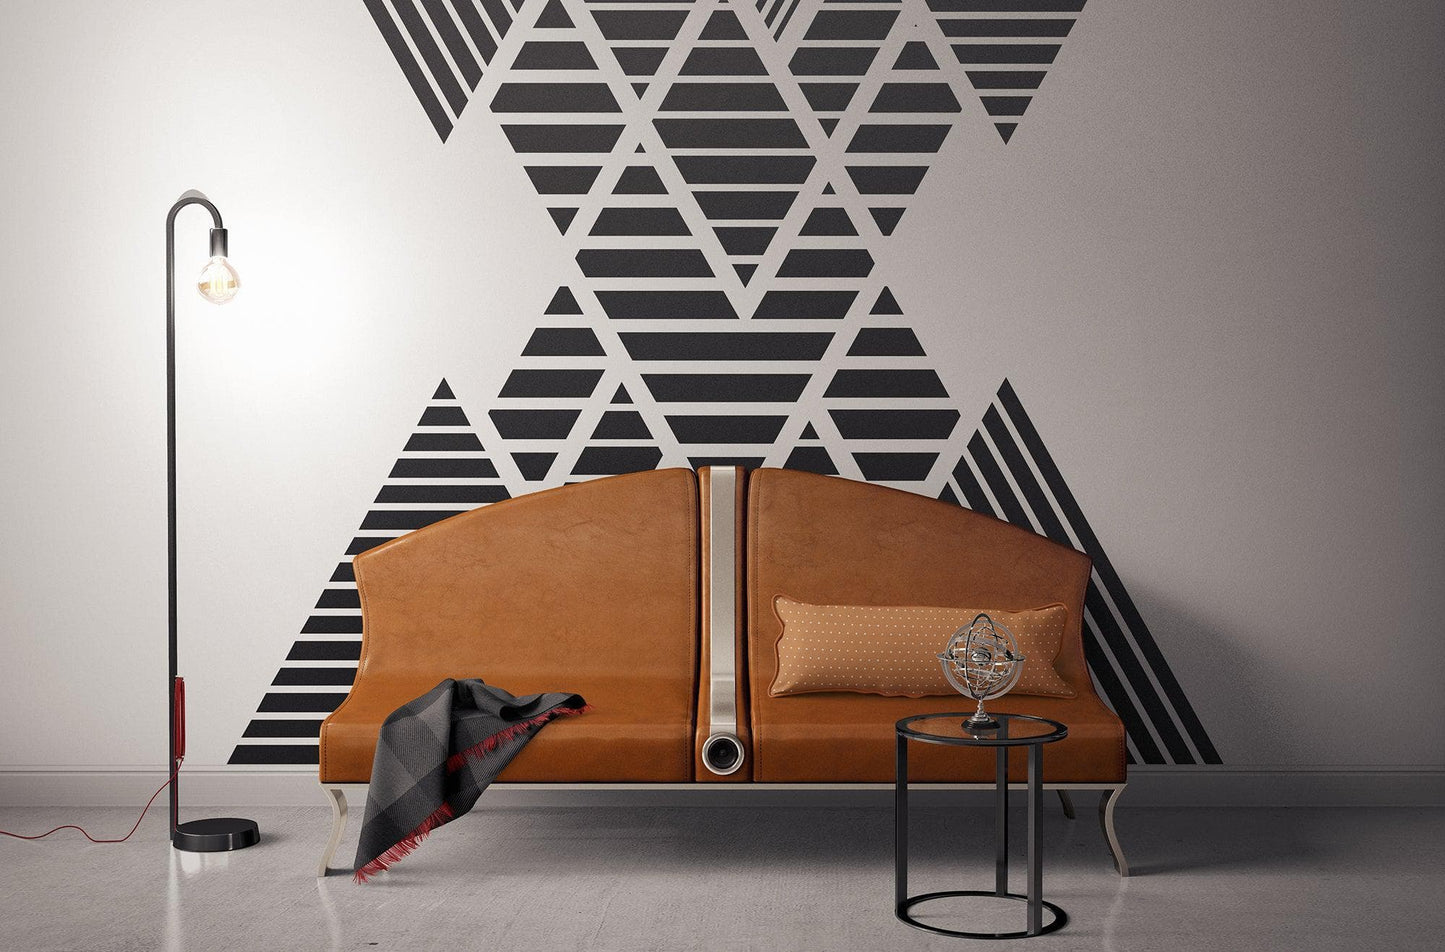 Geometric Pattern Double Vision Mountain Wall Decal. #OS_MB1248